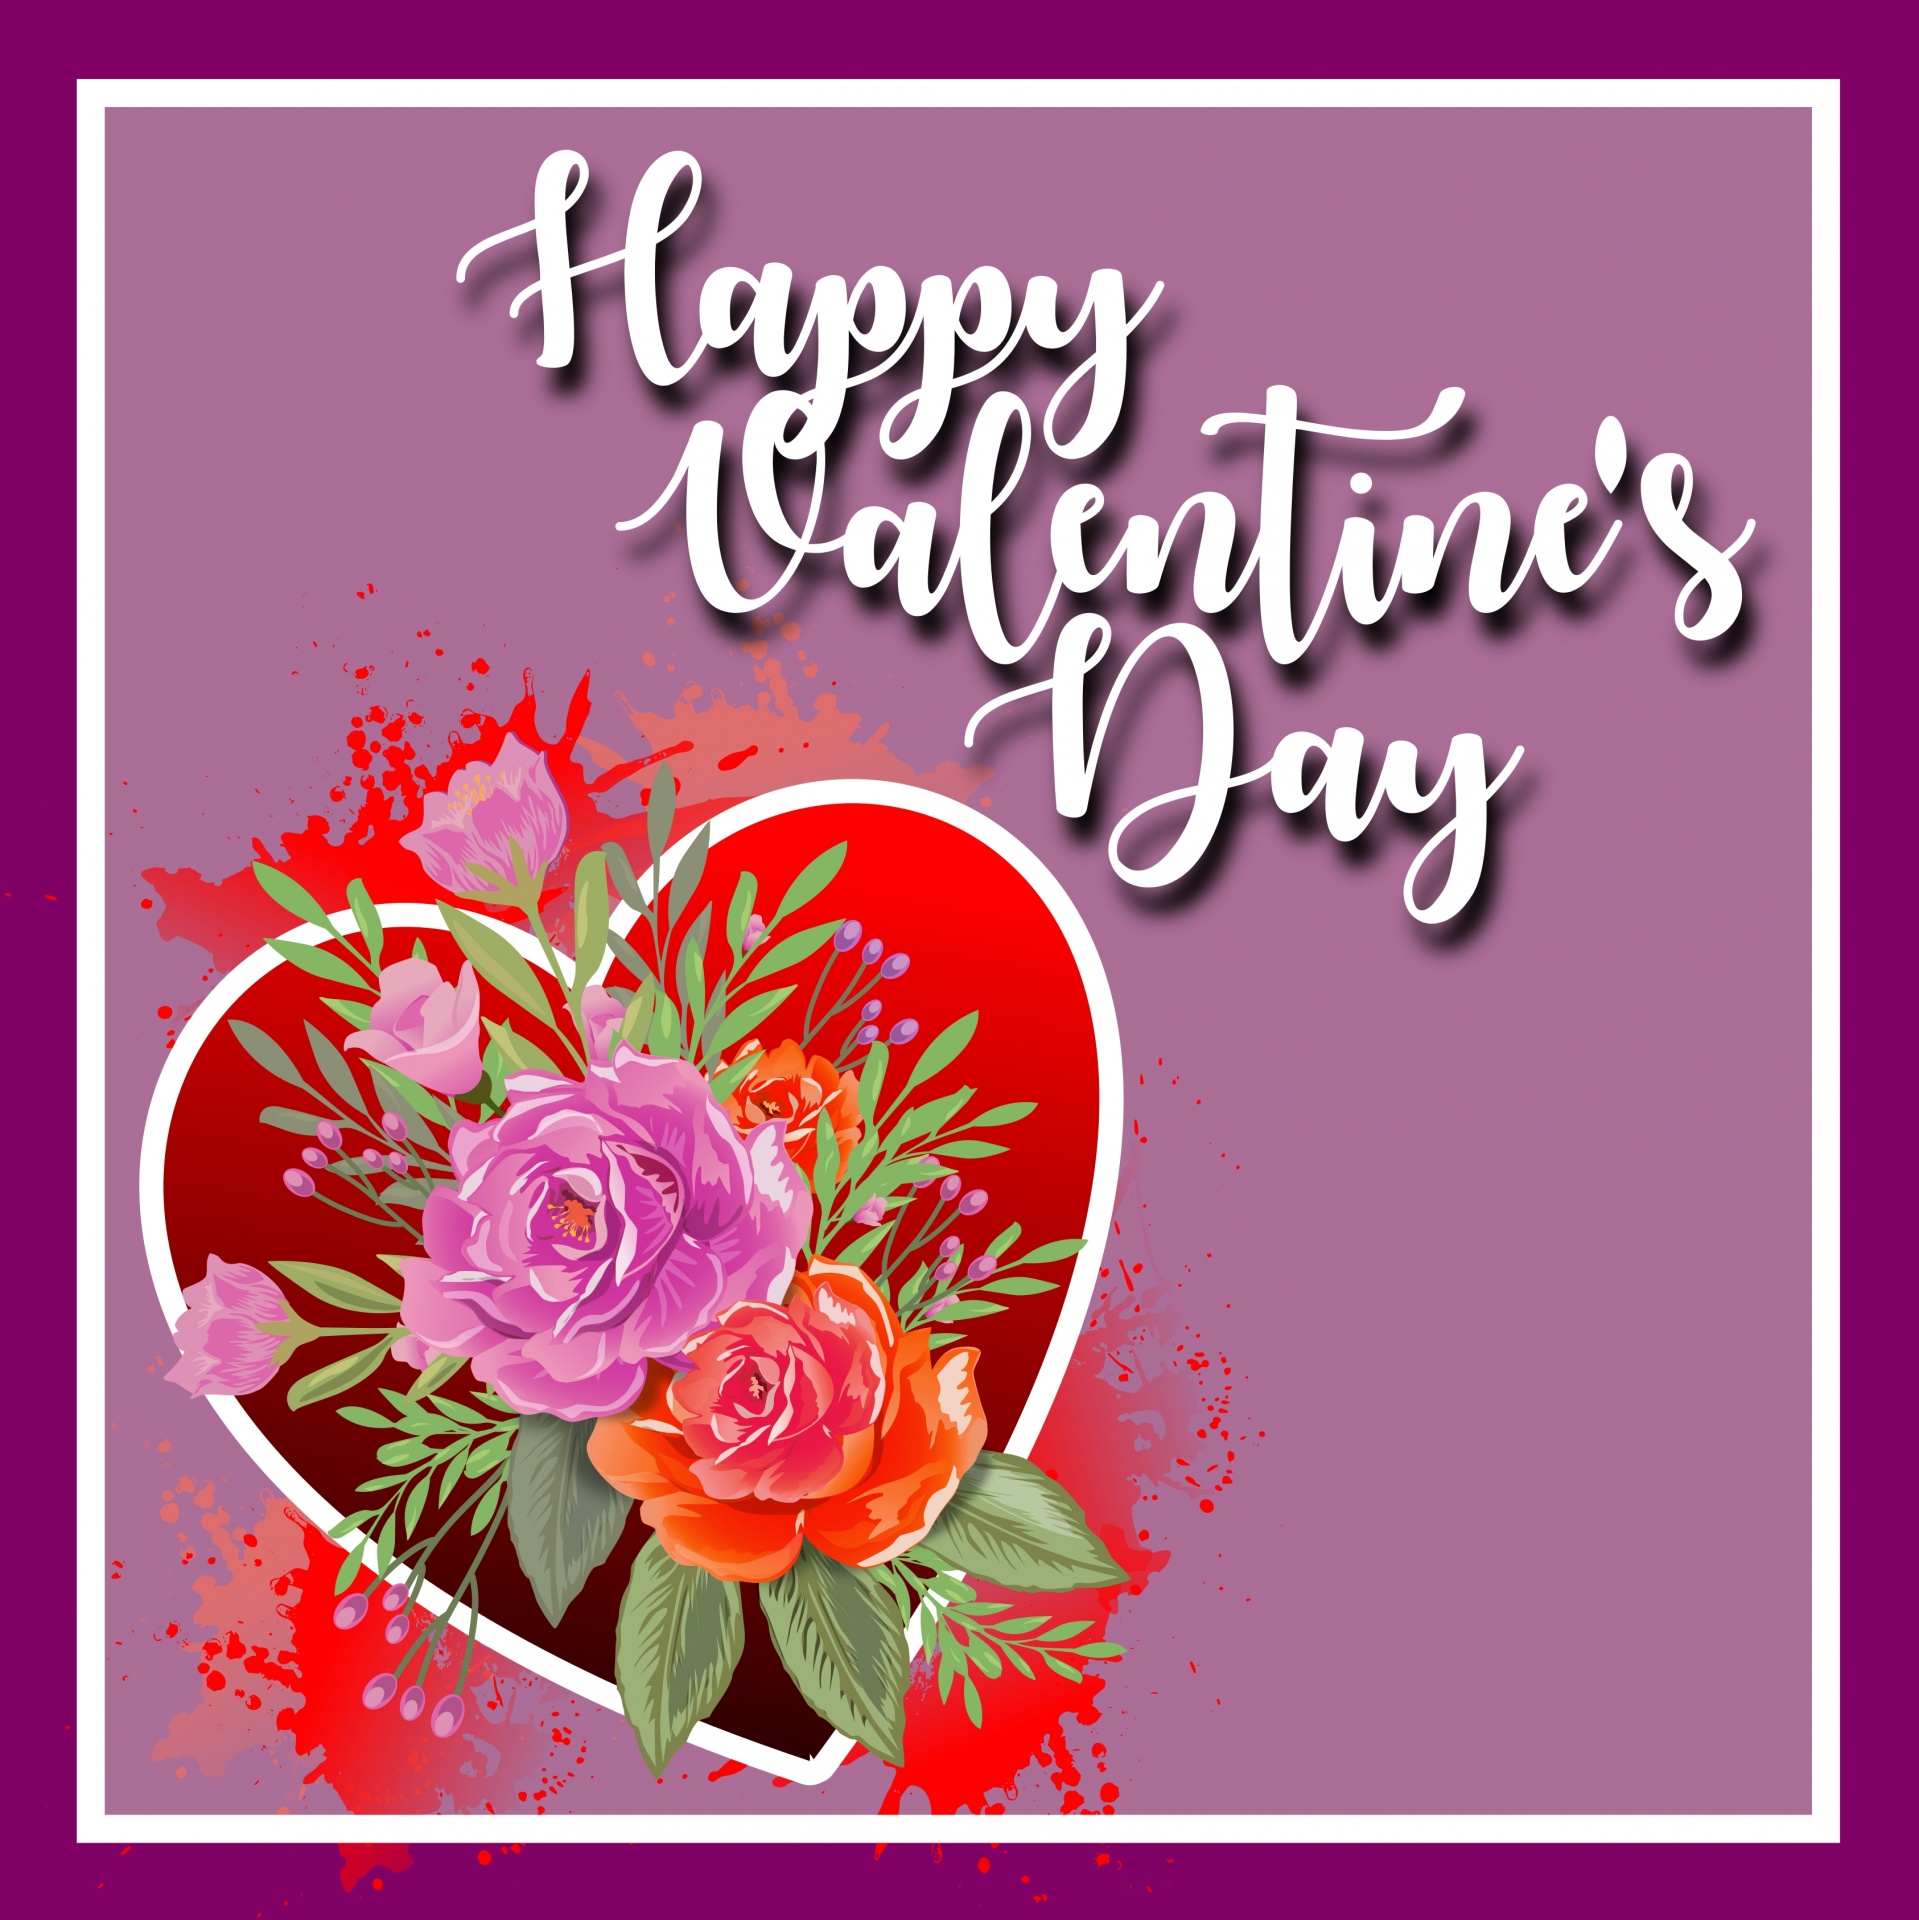 Happy Valentine's Day card with floral motif with stylized roses